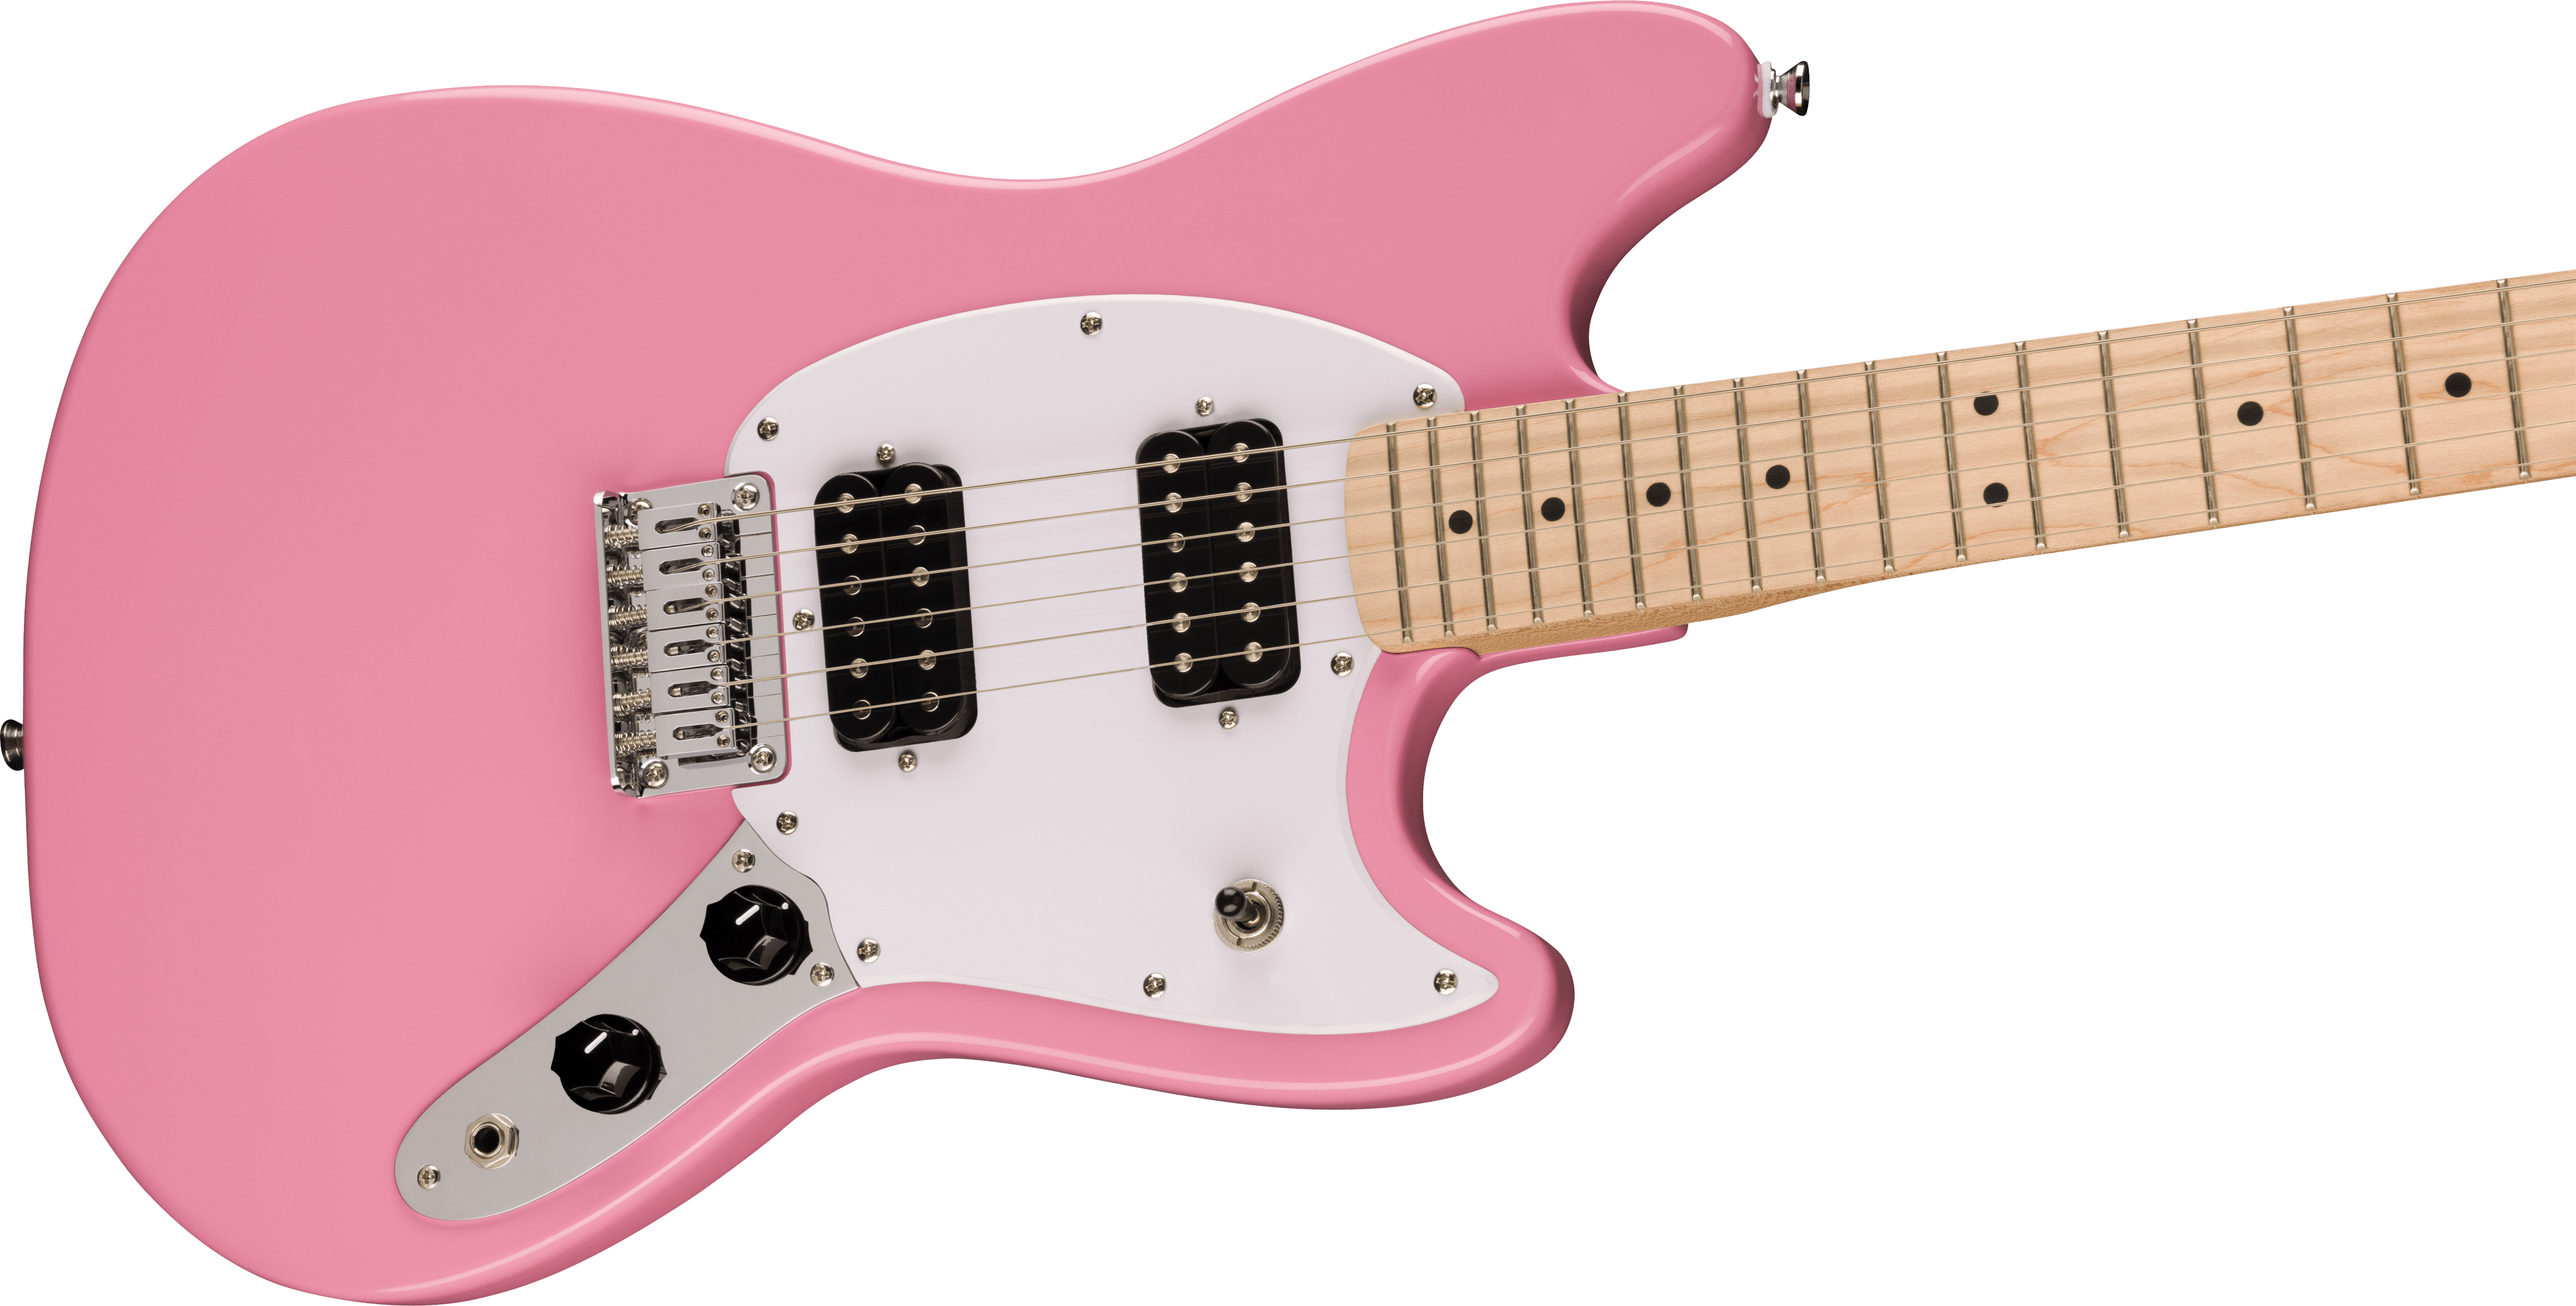 Squier Sonic Mustang HH in Flash Pink